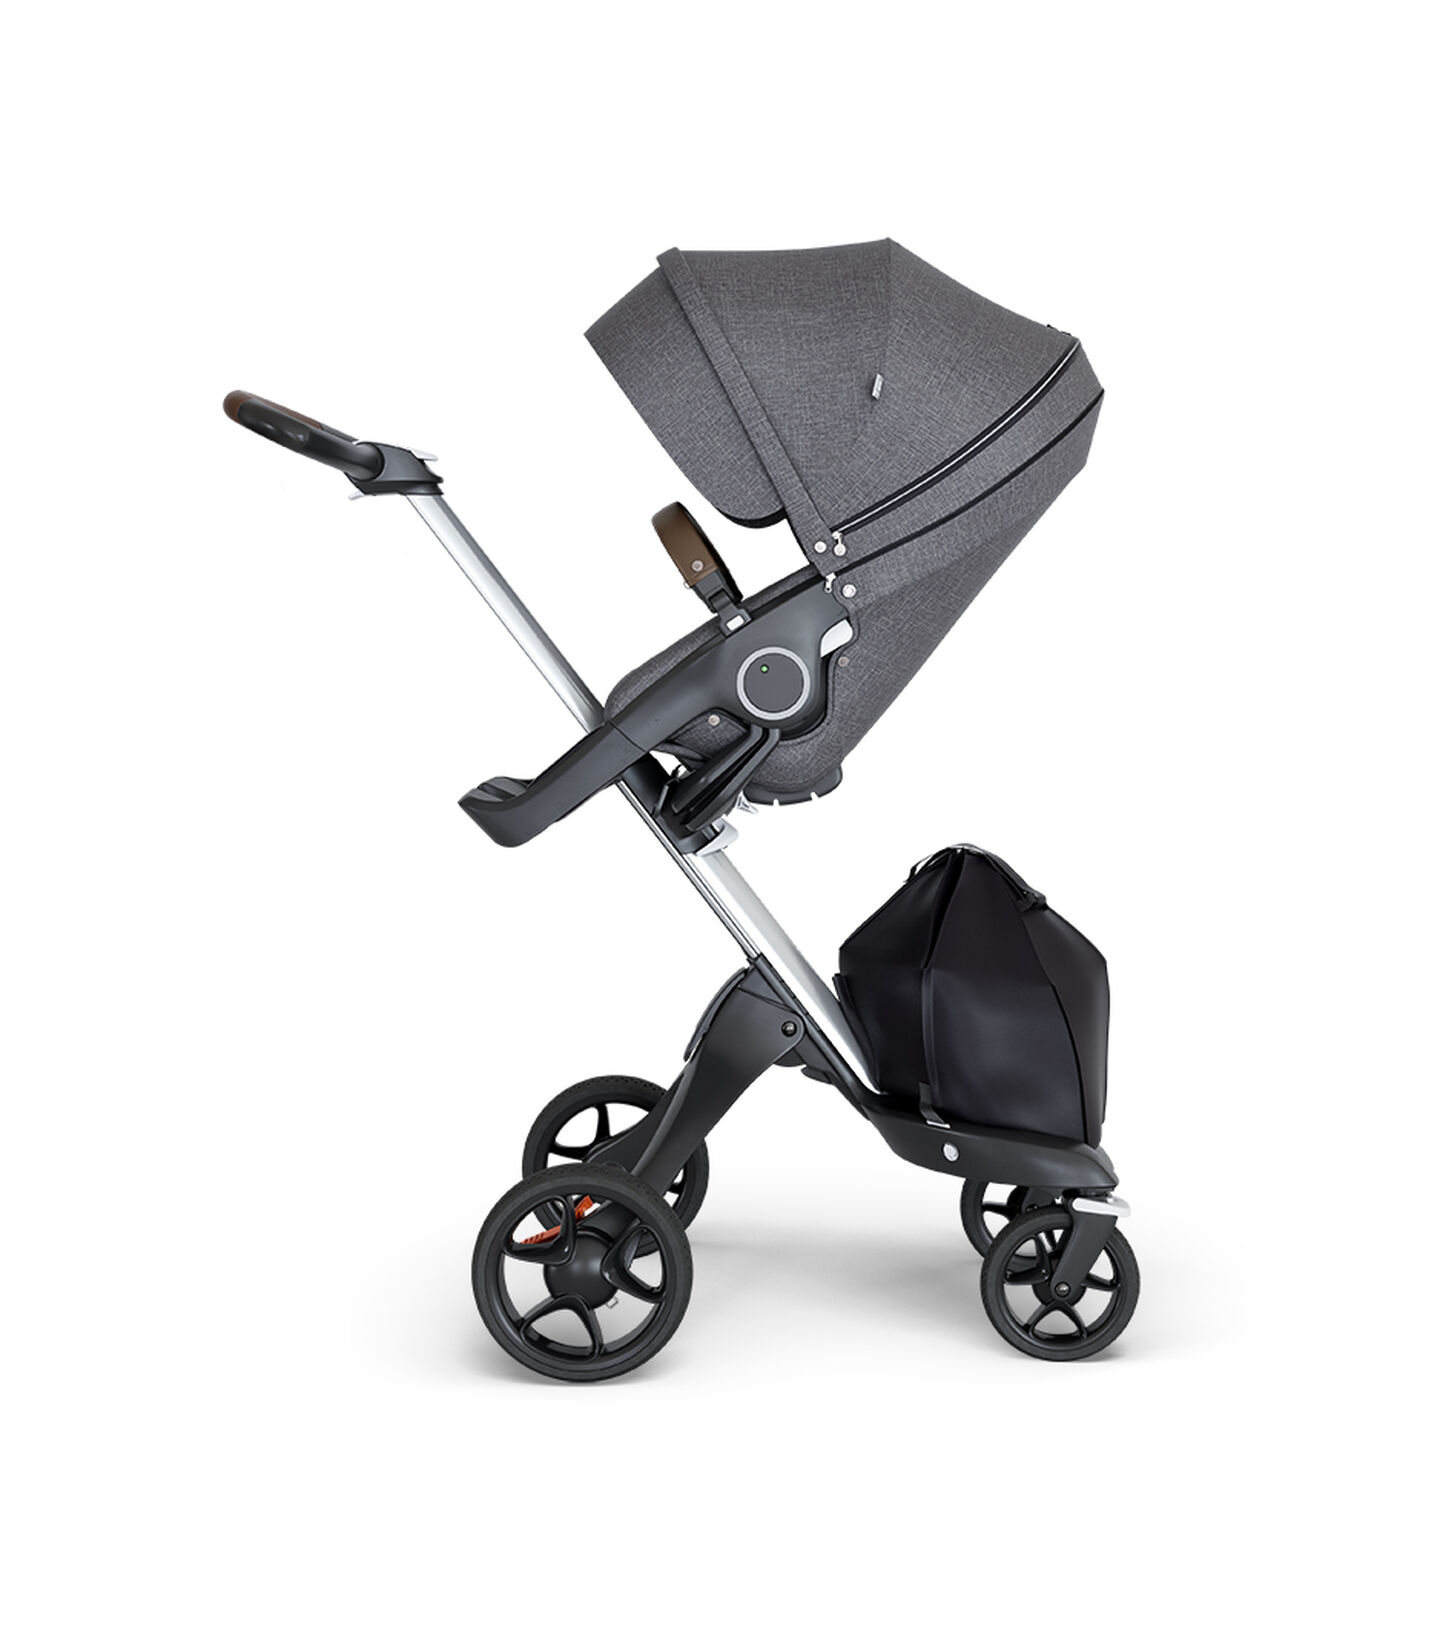 Stokke® Xplory® 6 Silver Chassis - Brown Handle Black Melange, 黑麻色, mainview view 1